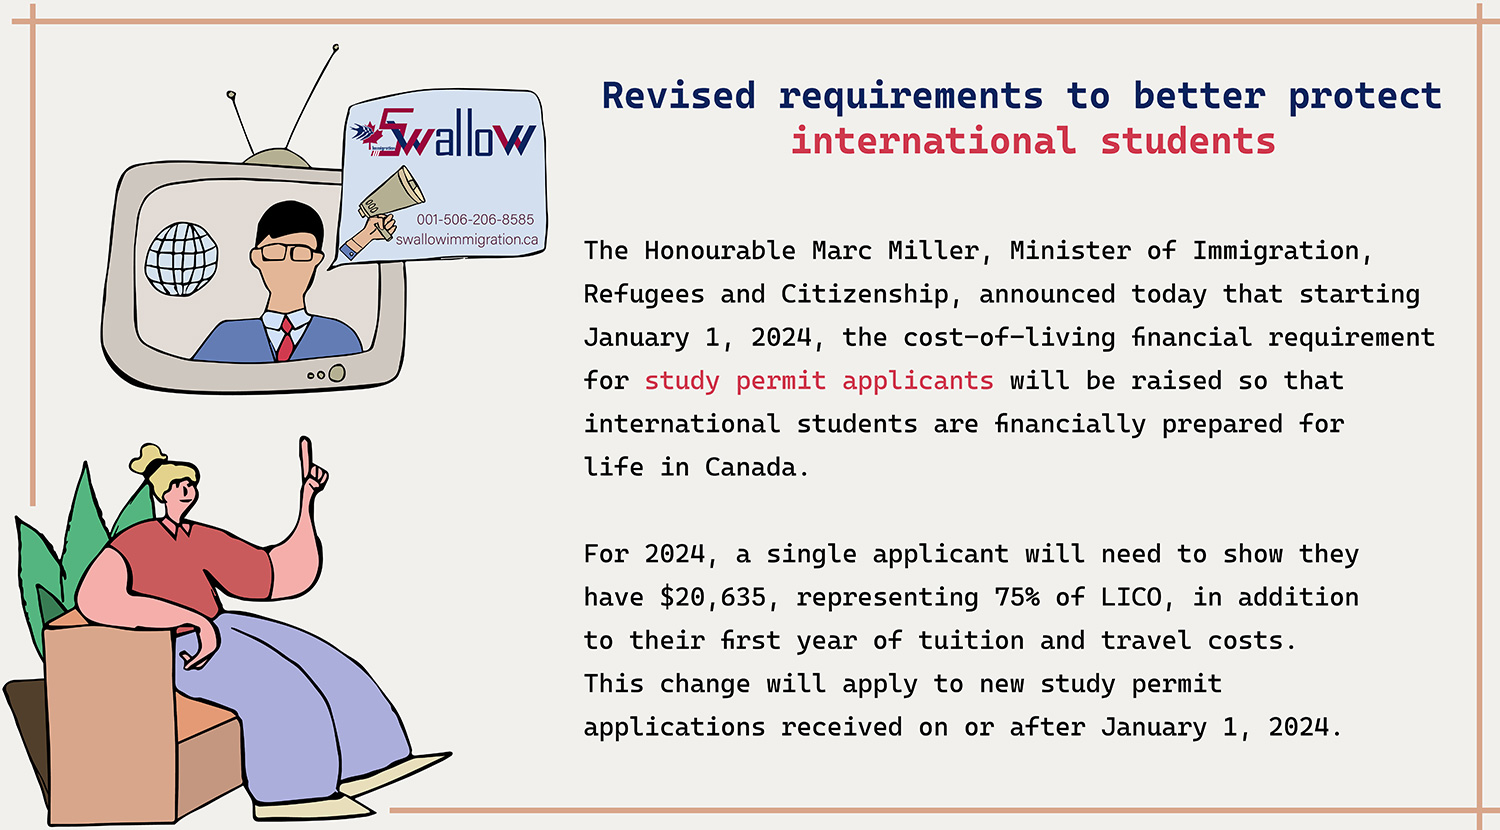 Revised requirements to better protect international students